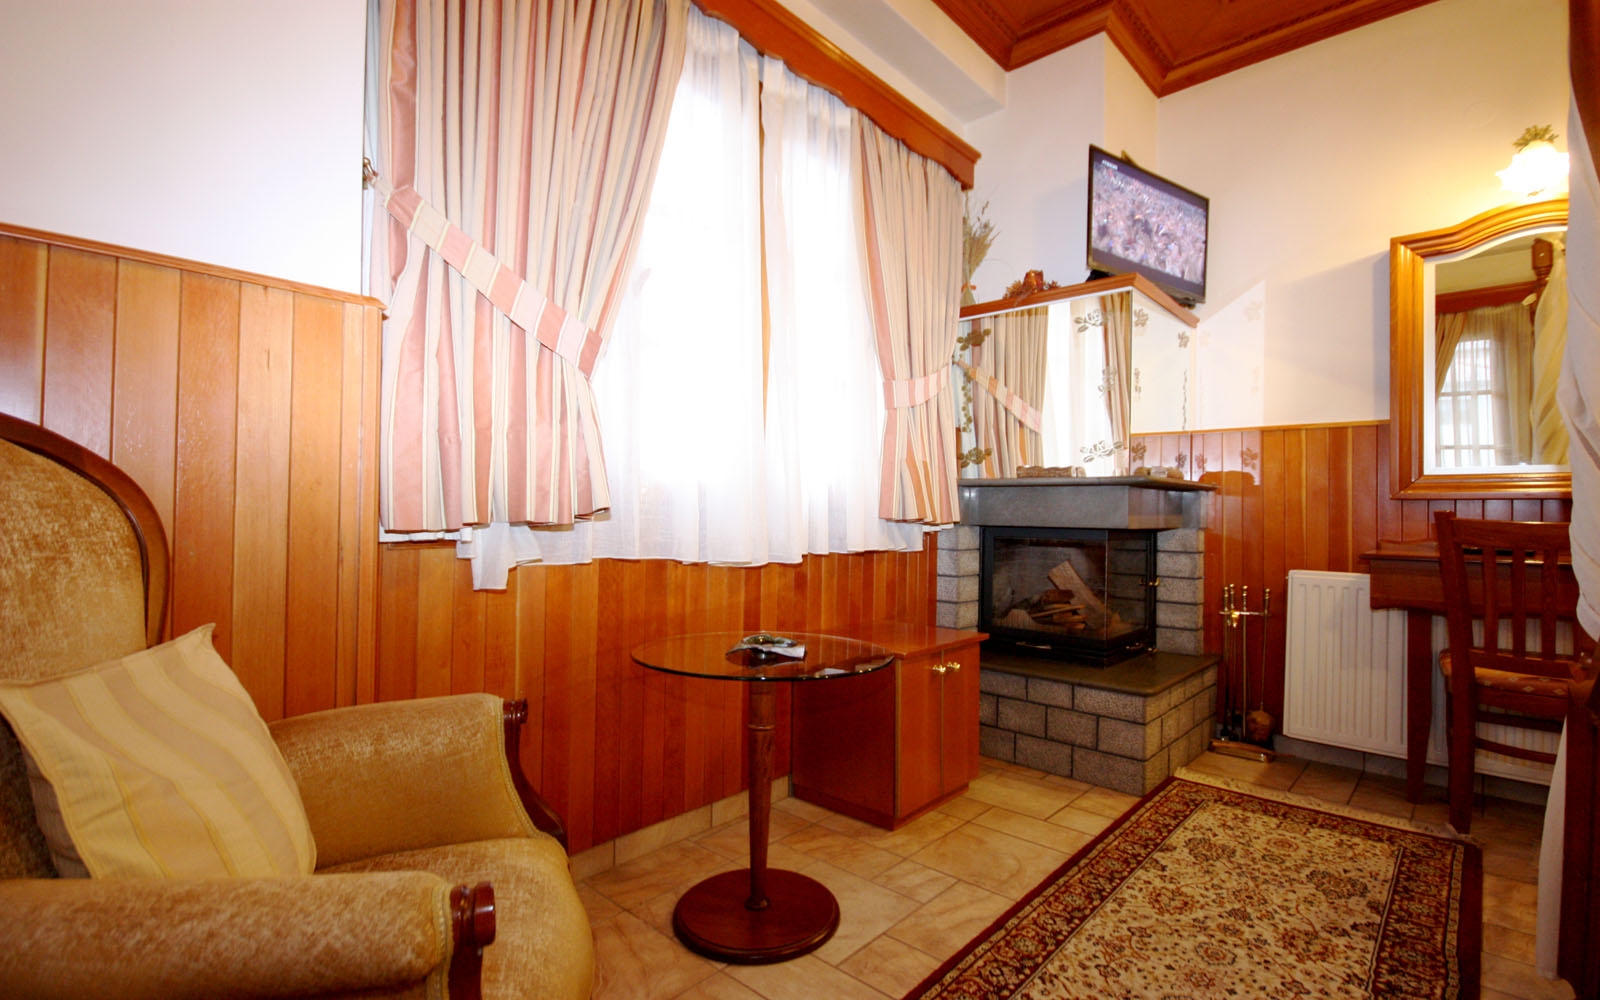 Deluxe Room with fireplace & hydromassage